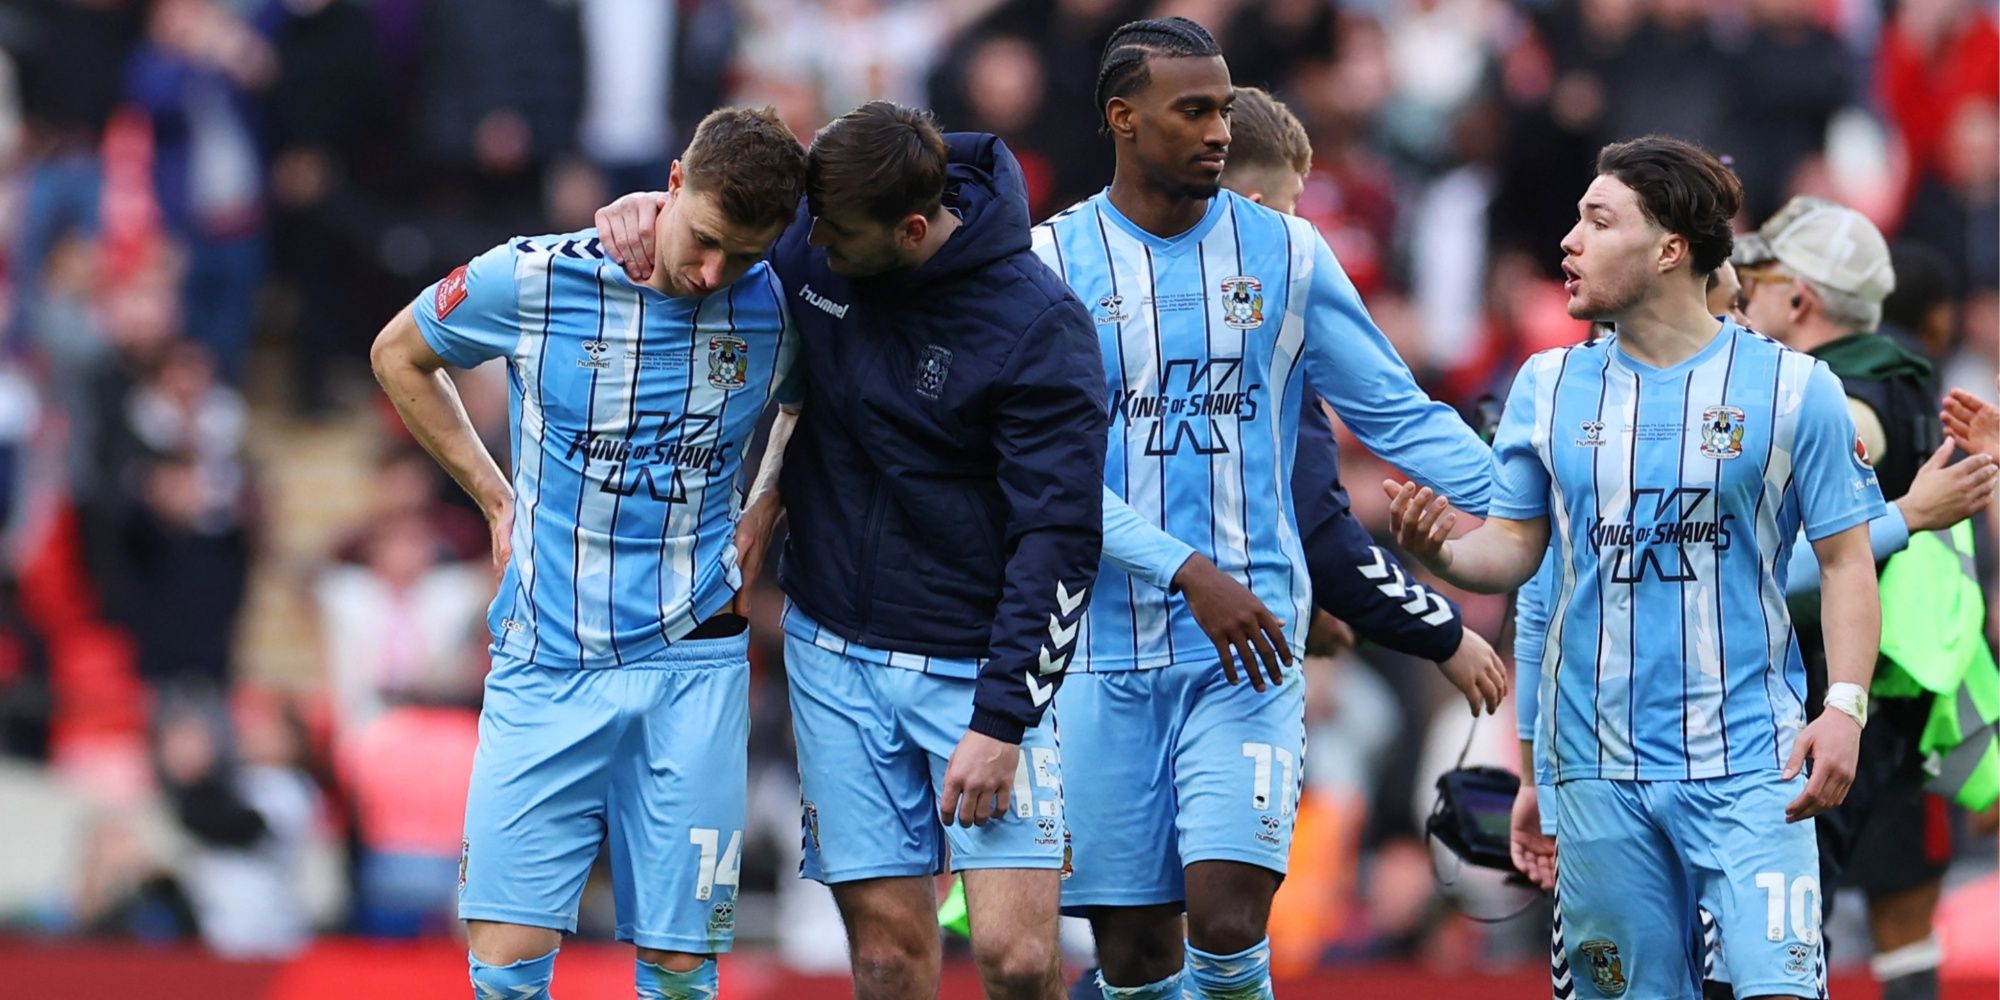 New Footage Casts Doubt Over Decision to Disallow Coventry Goal vs Man Utd